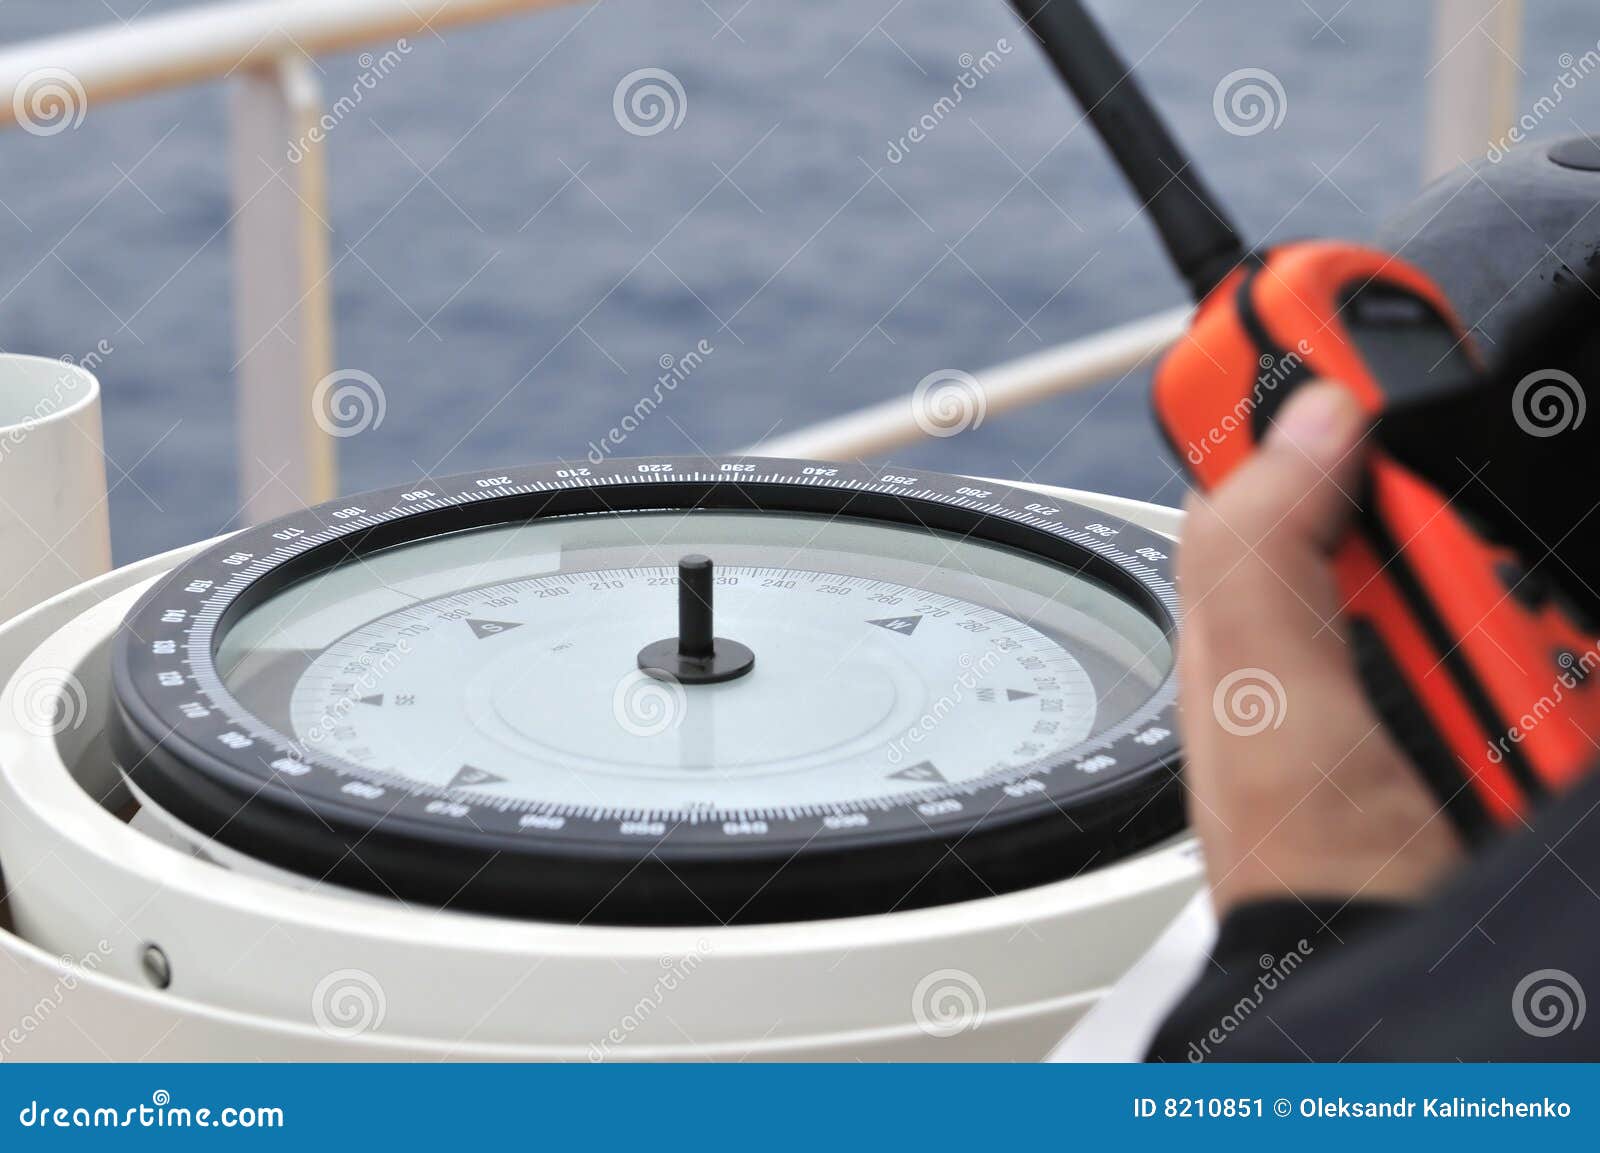 modern ship's compass and vhf